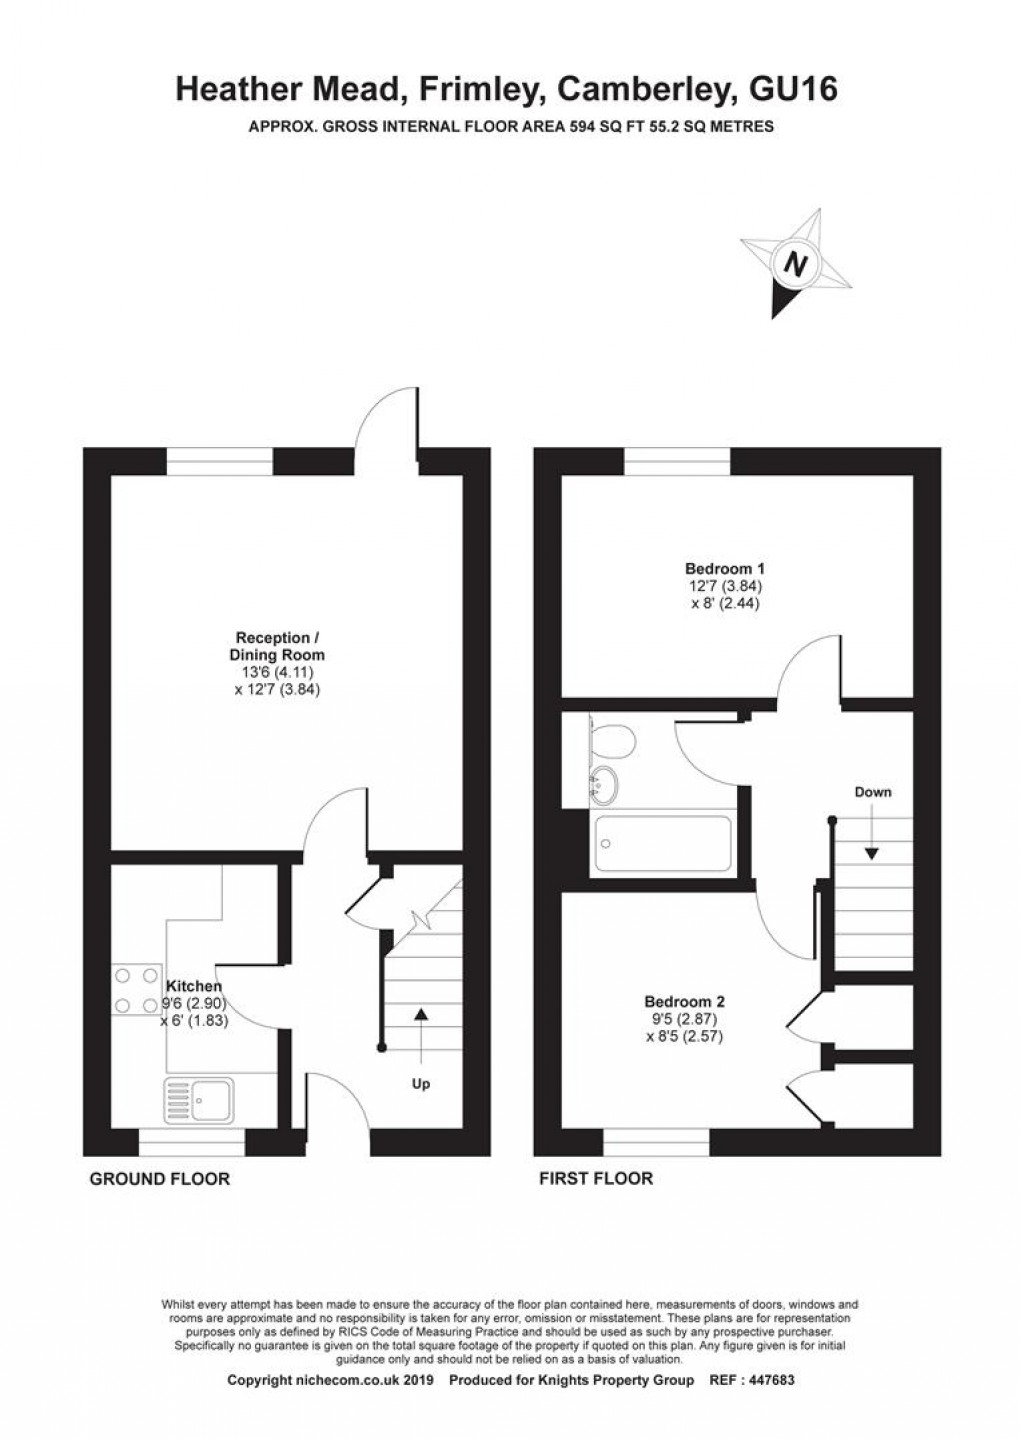 Floorplan for Heather Mead, Frimley, Camberley